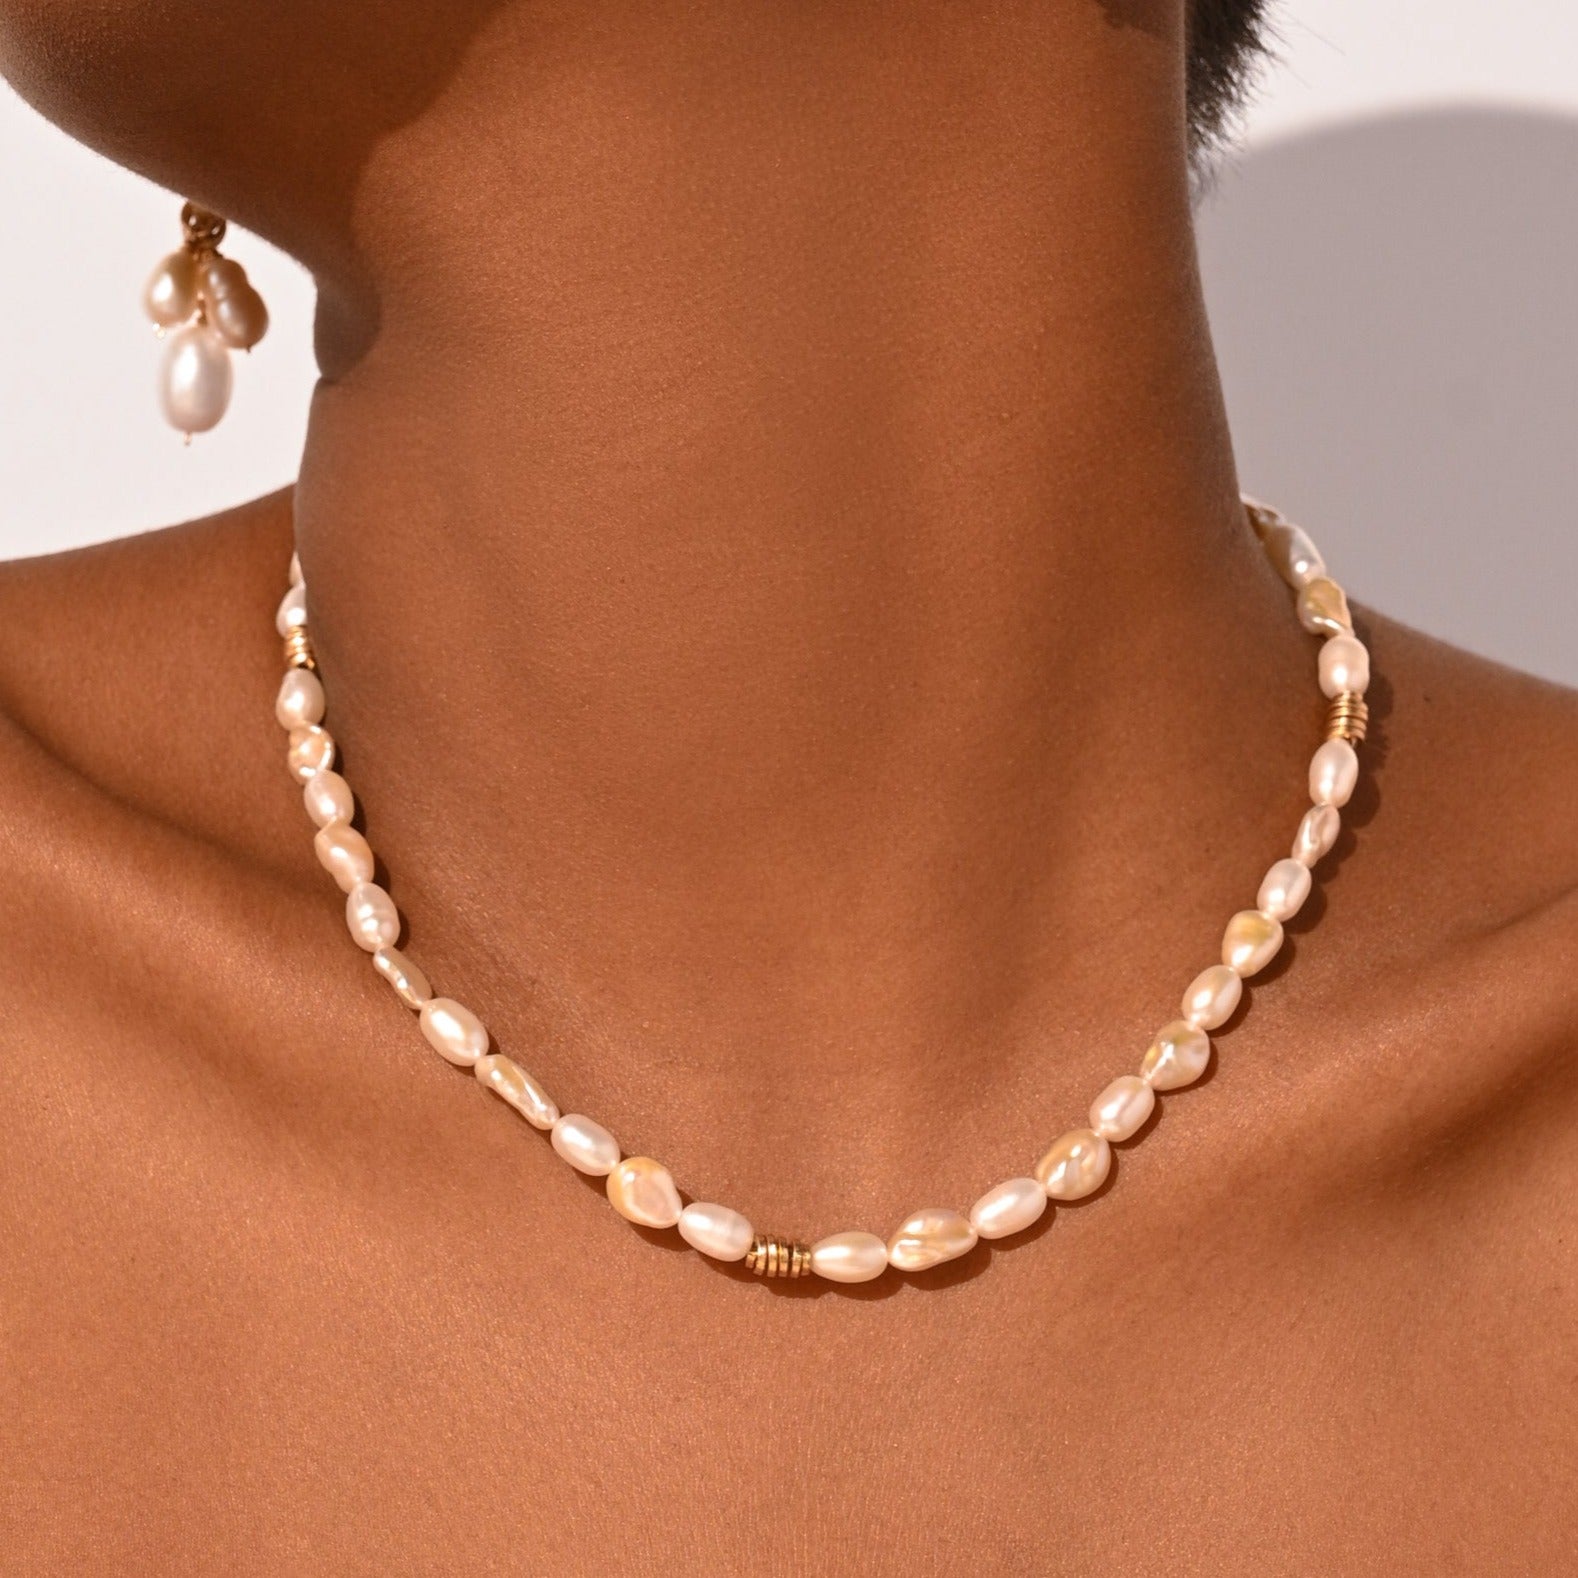 Diana Necklace #04 - Pearls Necklaces TARBAY   